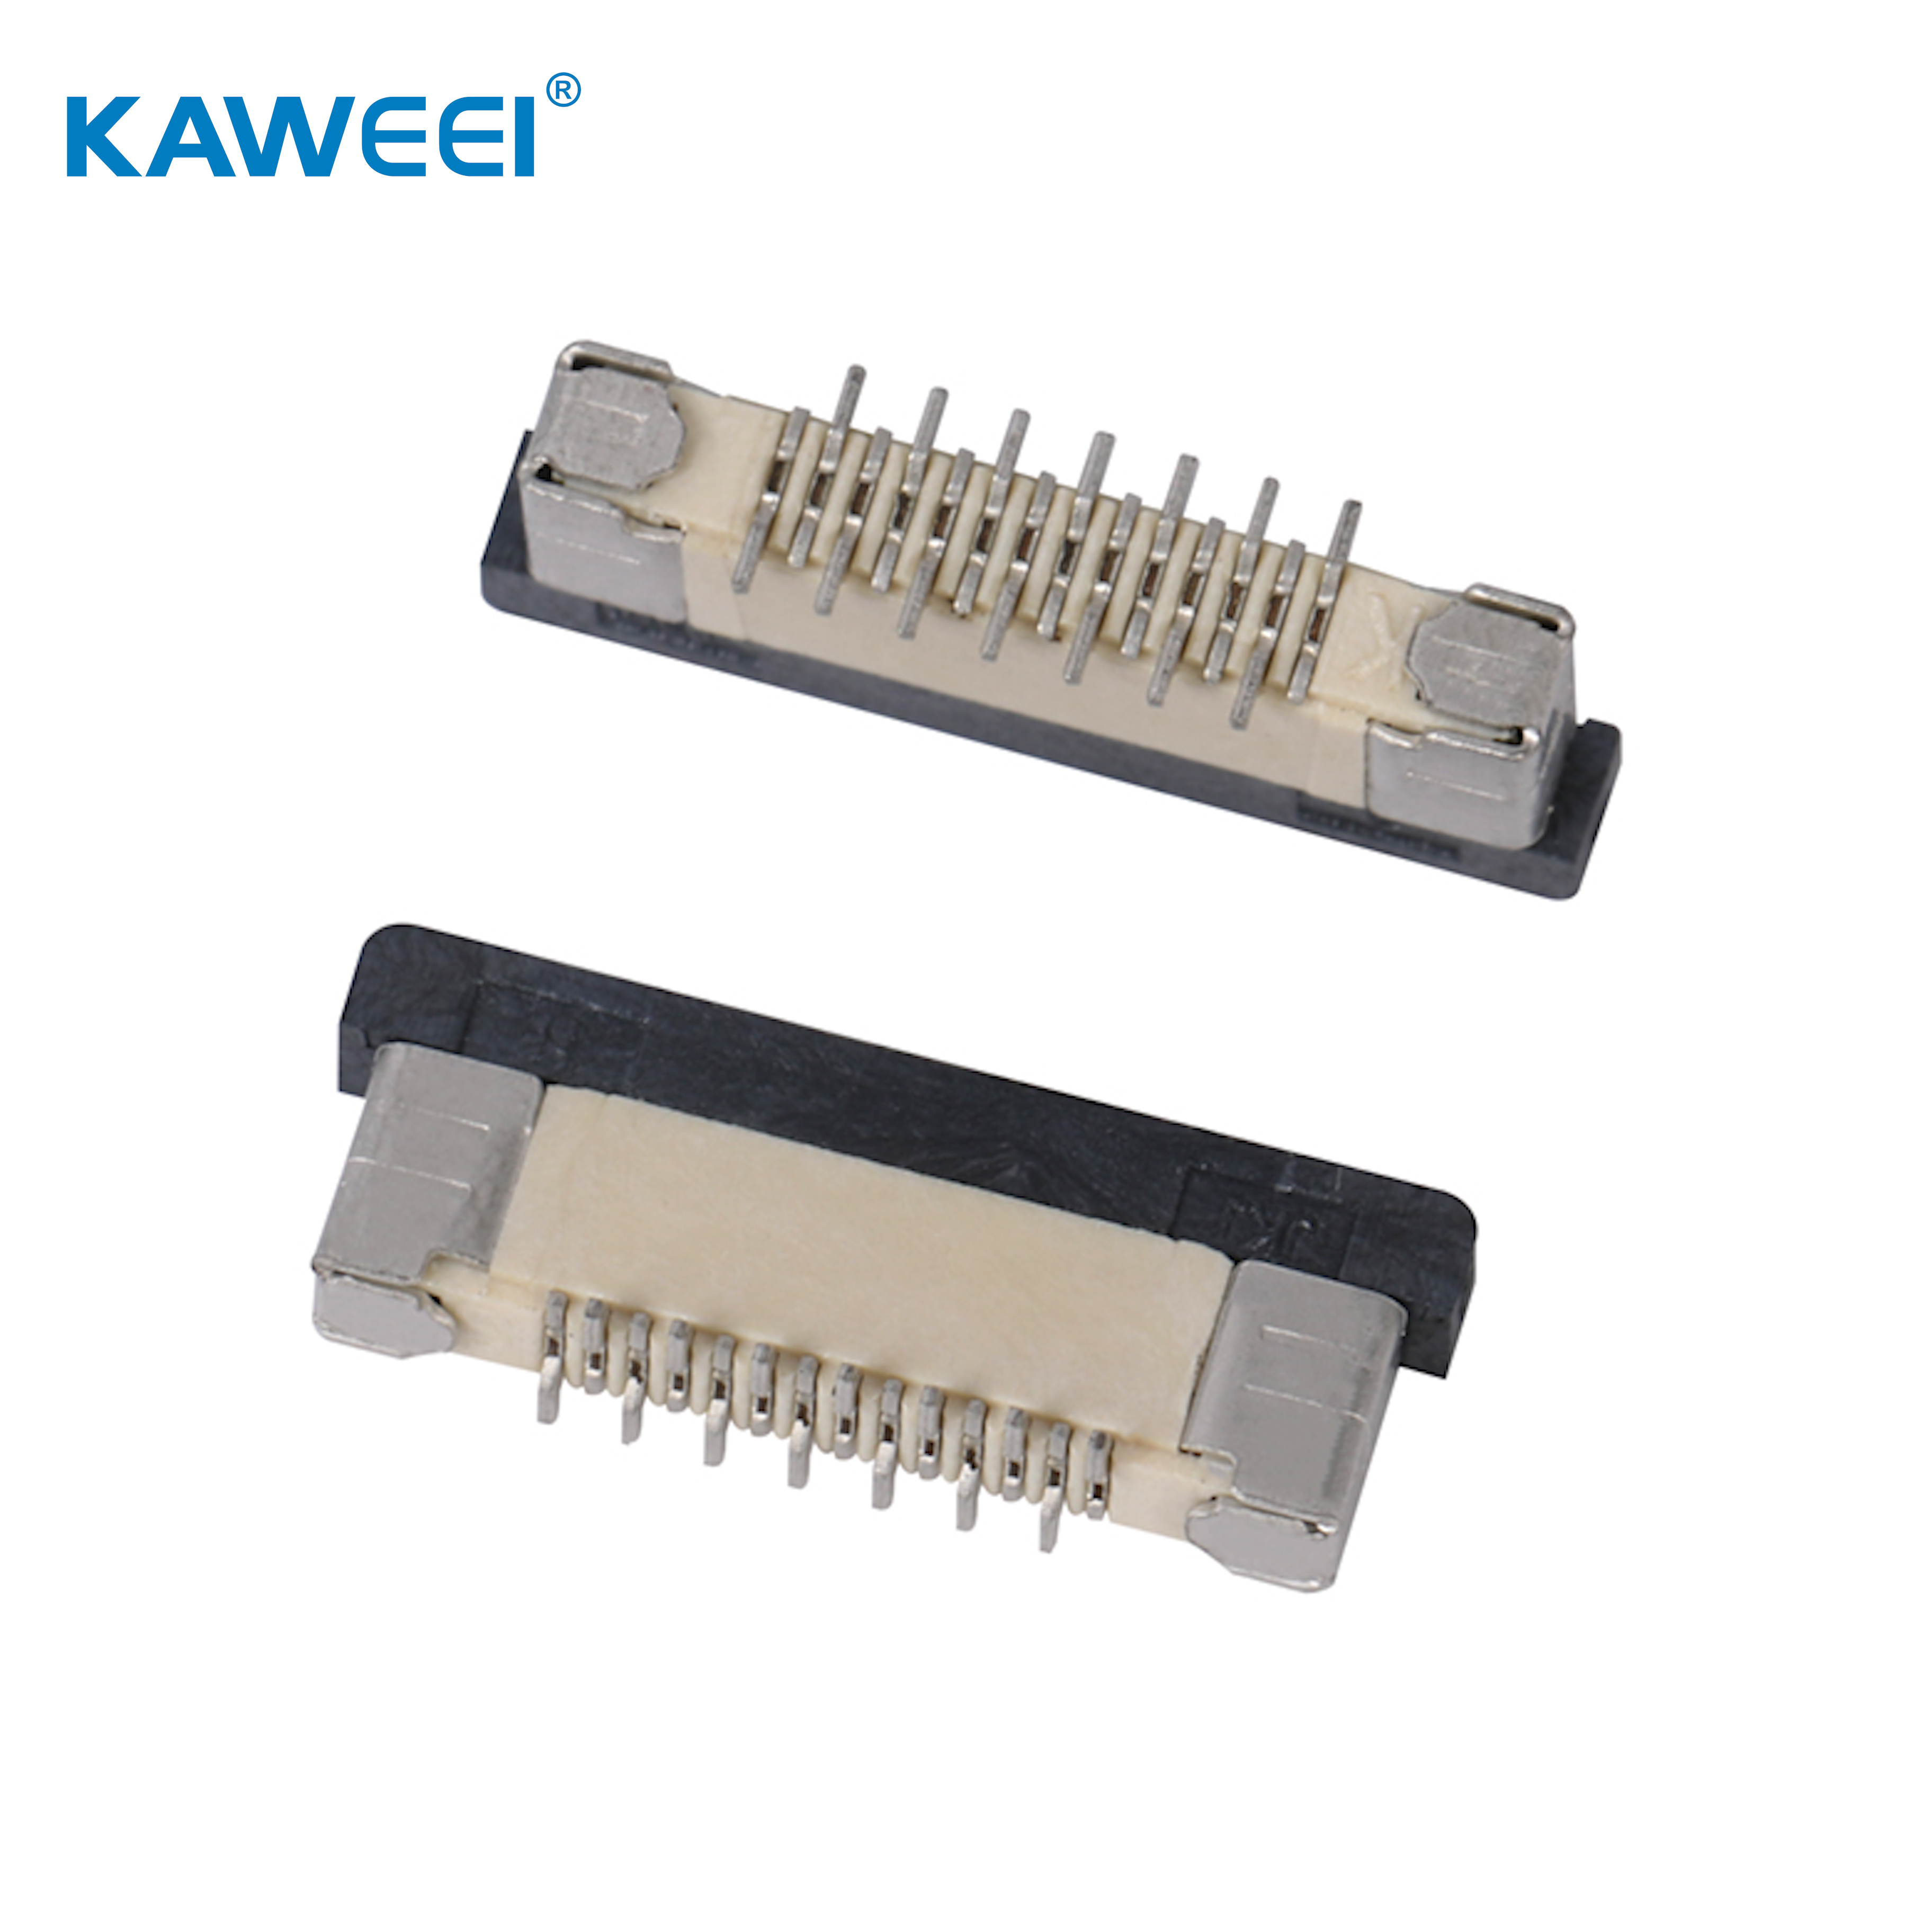 0.5mm pitch ffc/fpc vertical SMT reverse type connector